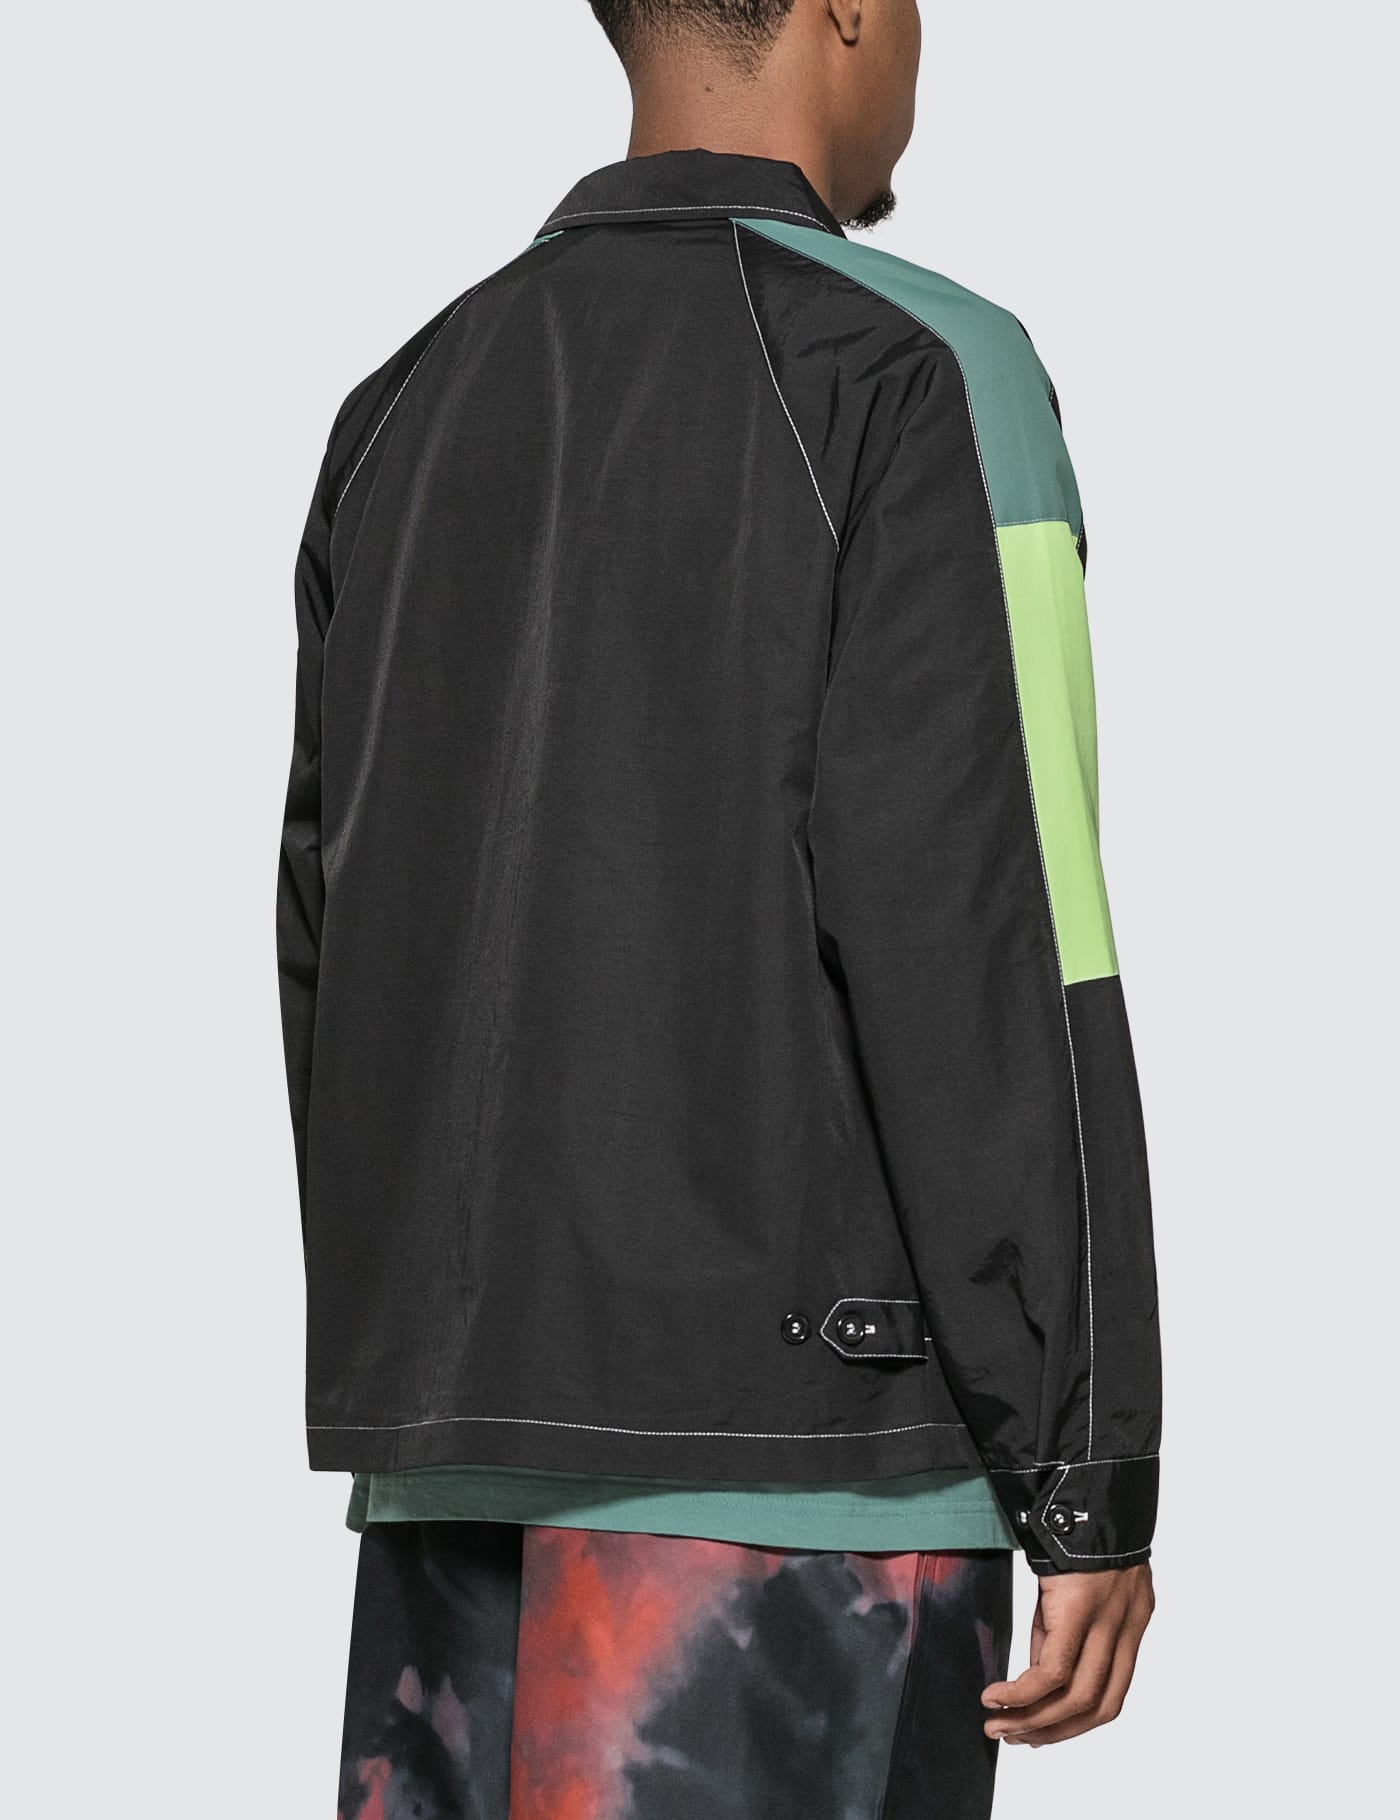 Stüssy - Panel Zip Jacket | HBX - Globally Curated Fashion and 